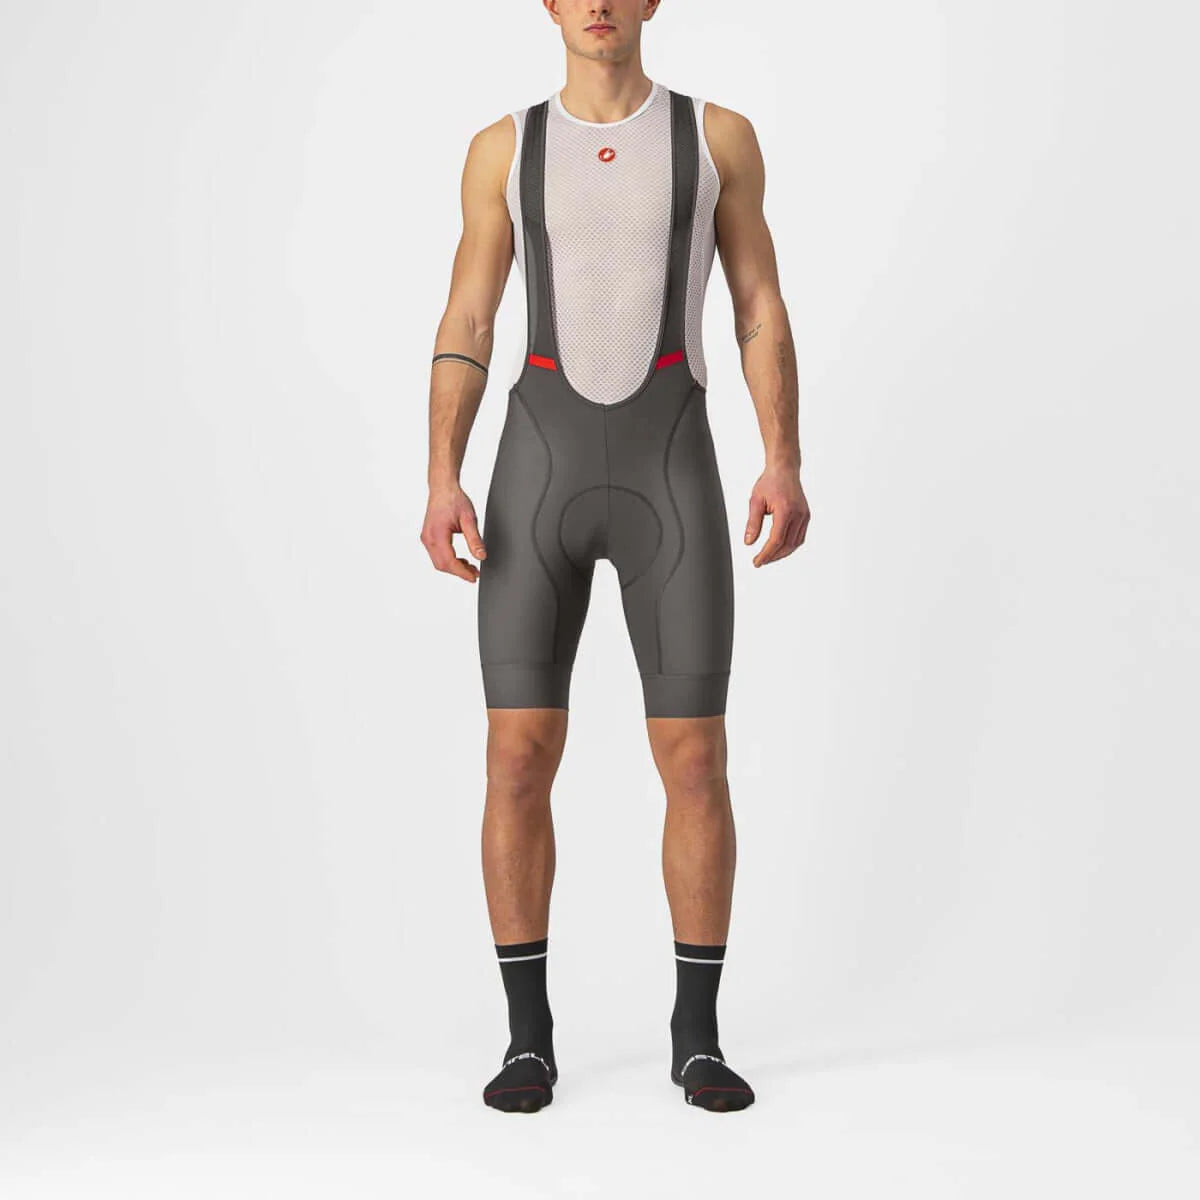 CASTELLI COMPETIZIONE MENS CYCLING BIBSHORTS (FOREST GRAY)